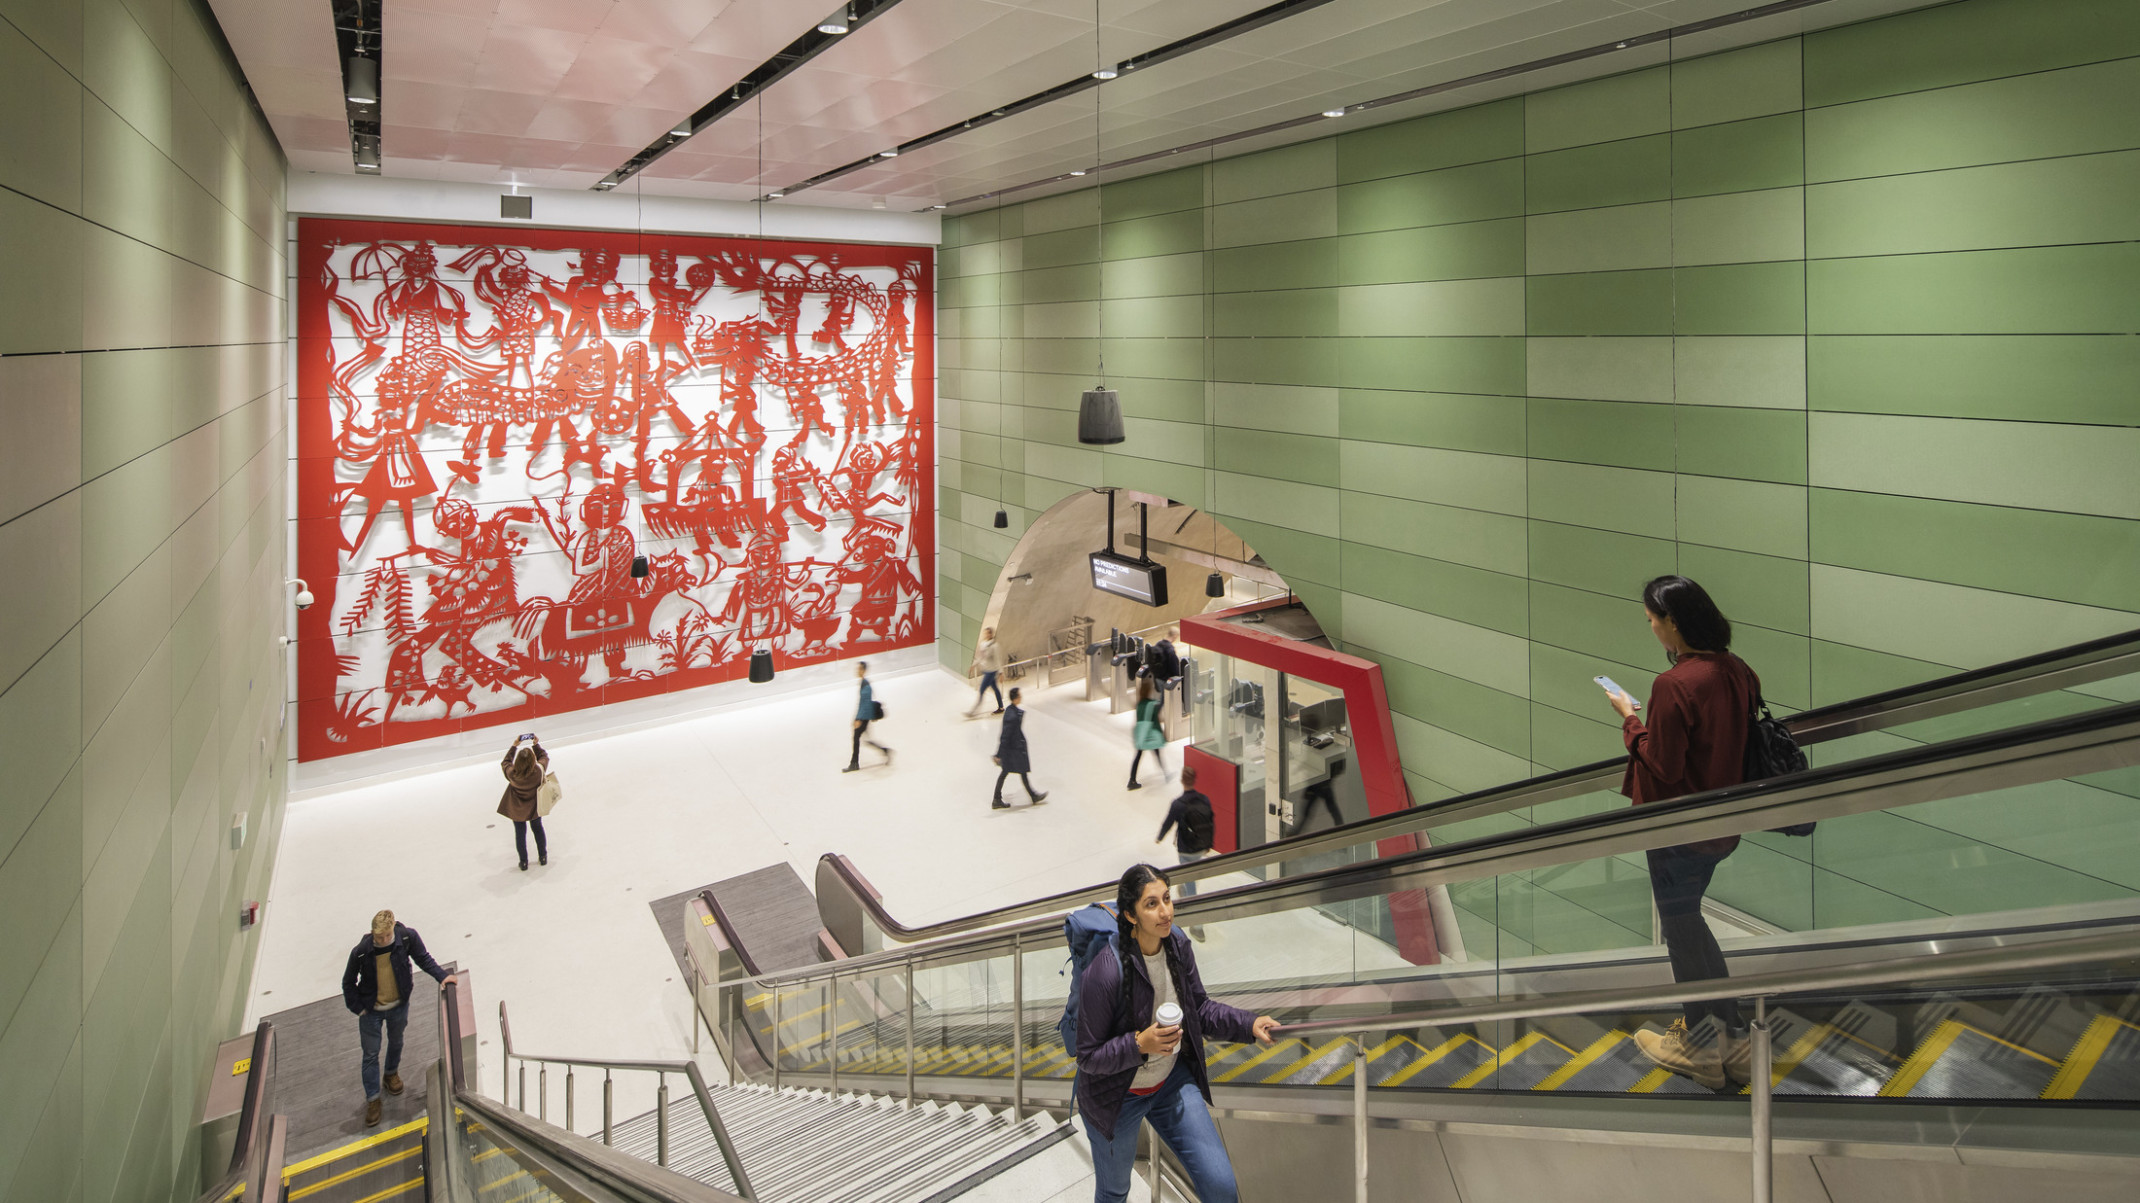 Concrete block walls with raised red sculptural mural on left. Right, arched hall with gates and ticket booth by escalators